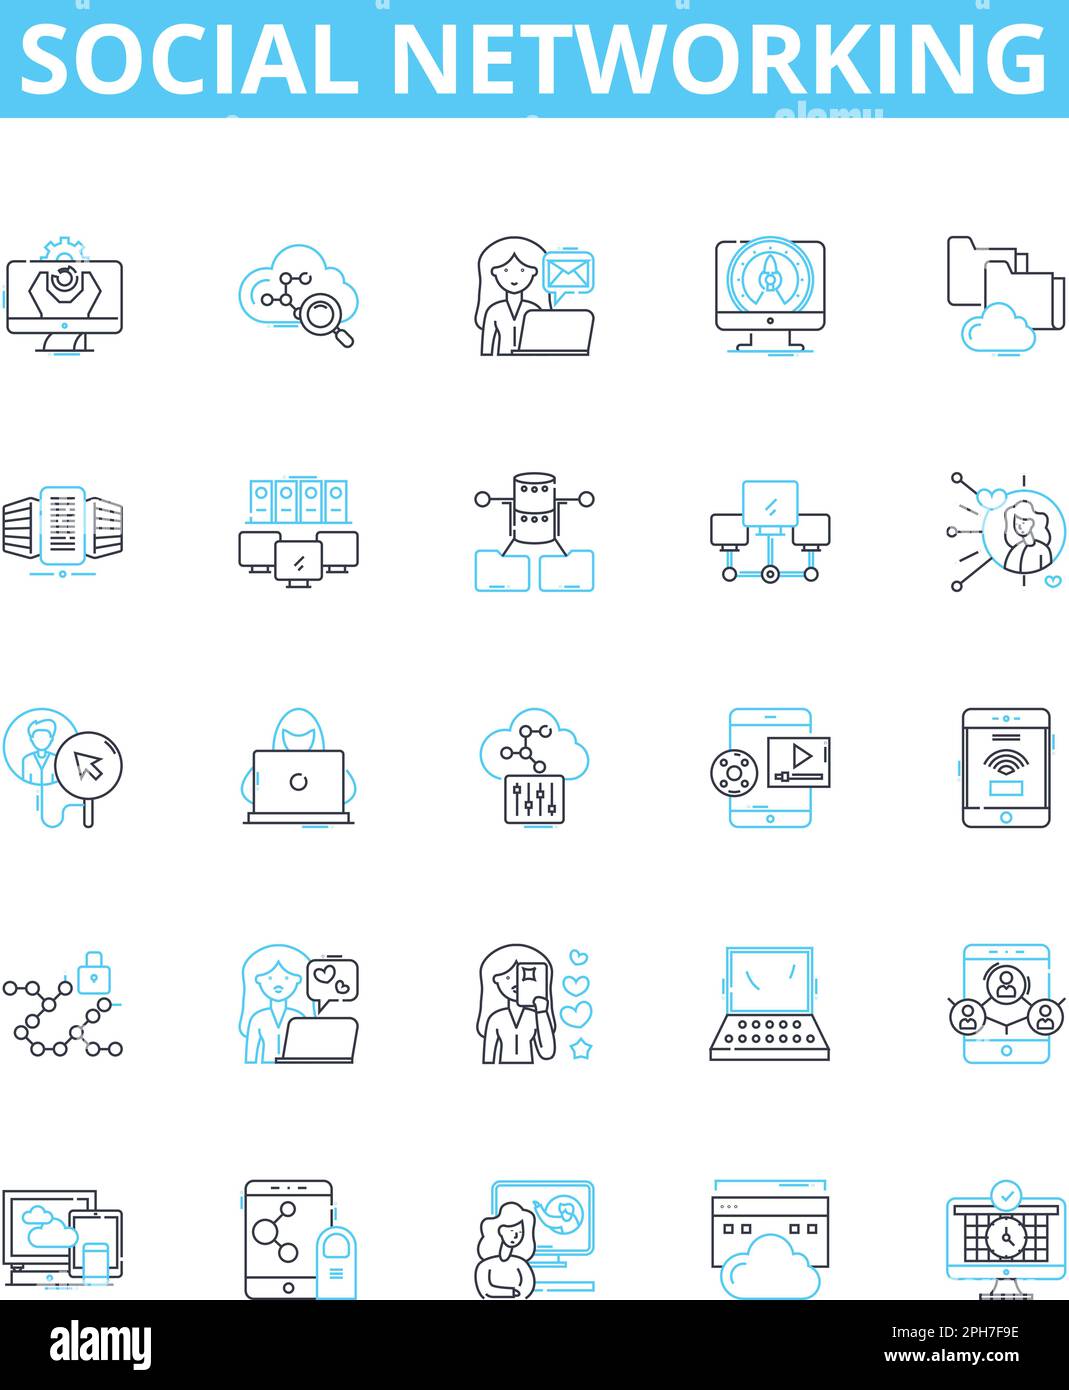 Social networking vector line icons set. Social, networking, networking, sites, media, profiles, interaction illustration outline concept symbols and Stock Vector